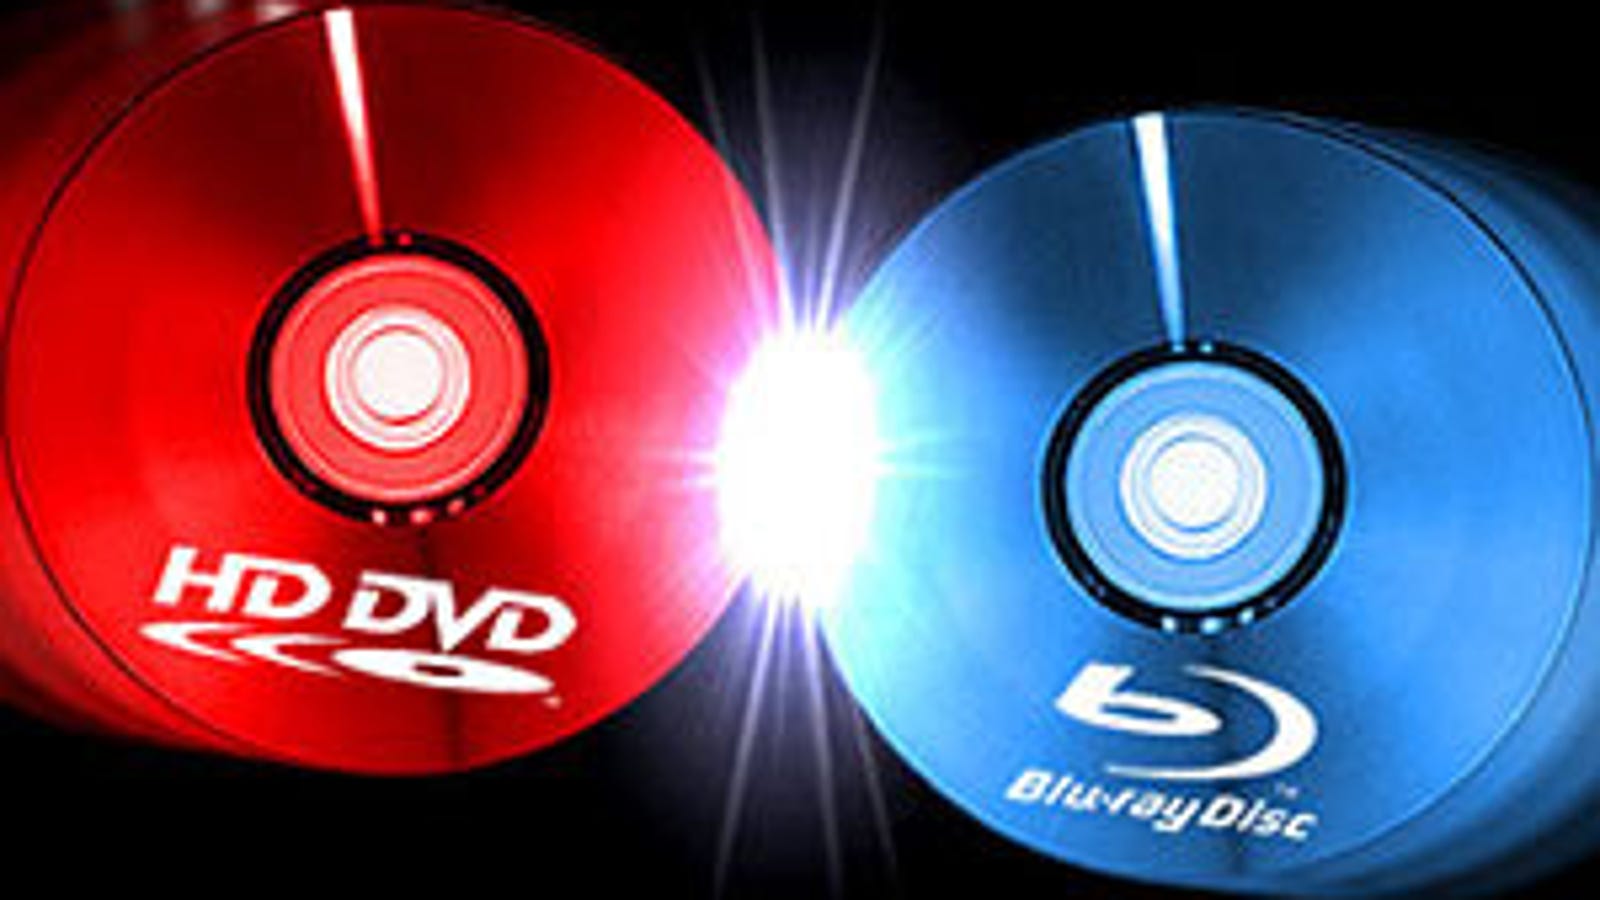 Hd Dvd And Blu Ray Compared Using Identical Source Material